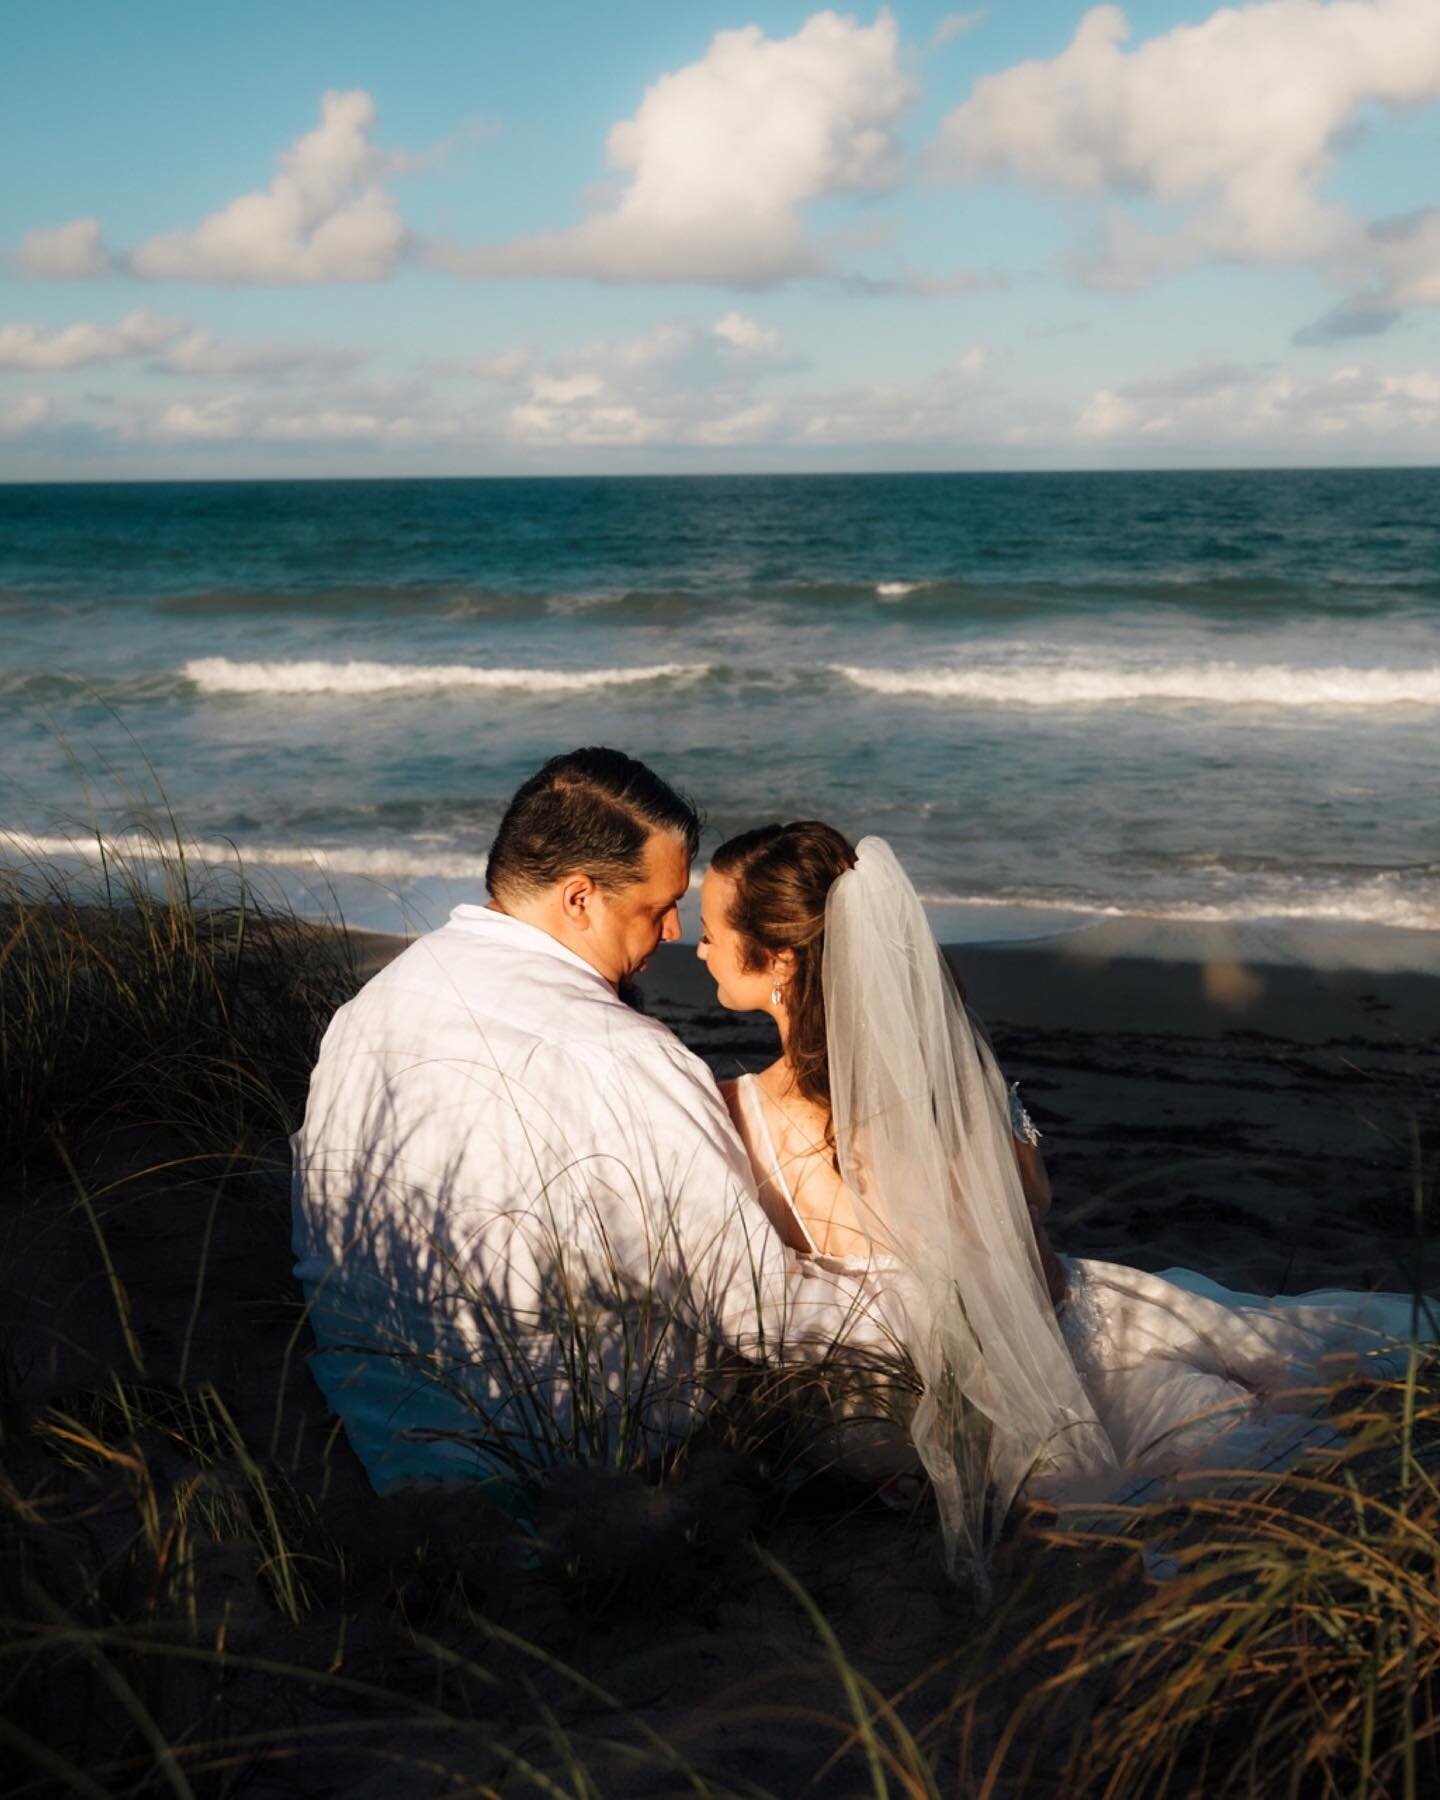 Wedding season is HERE! 🎉🥳

Kicking this year off with another Florida beach wedding this weekend! We are heading to Madeira Beach with Chris and Taylor!🏝️💍

Honored to be photographing so many amazing couple&rsquo;s love again this year and trul